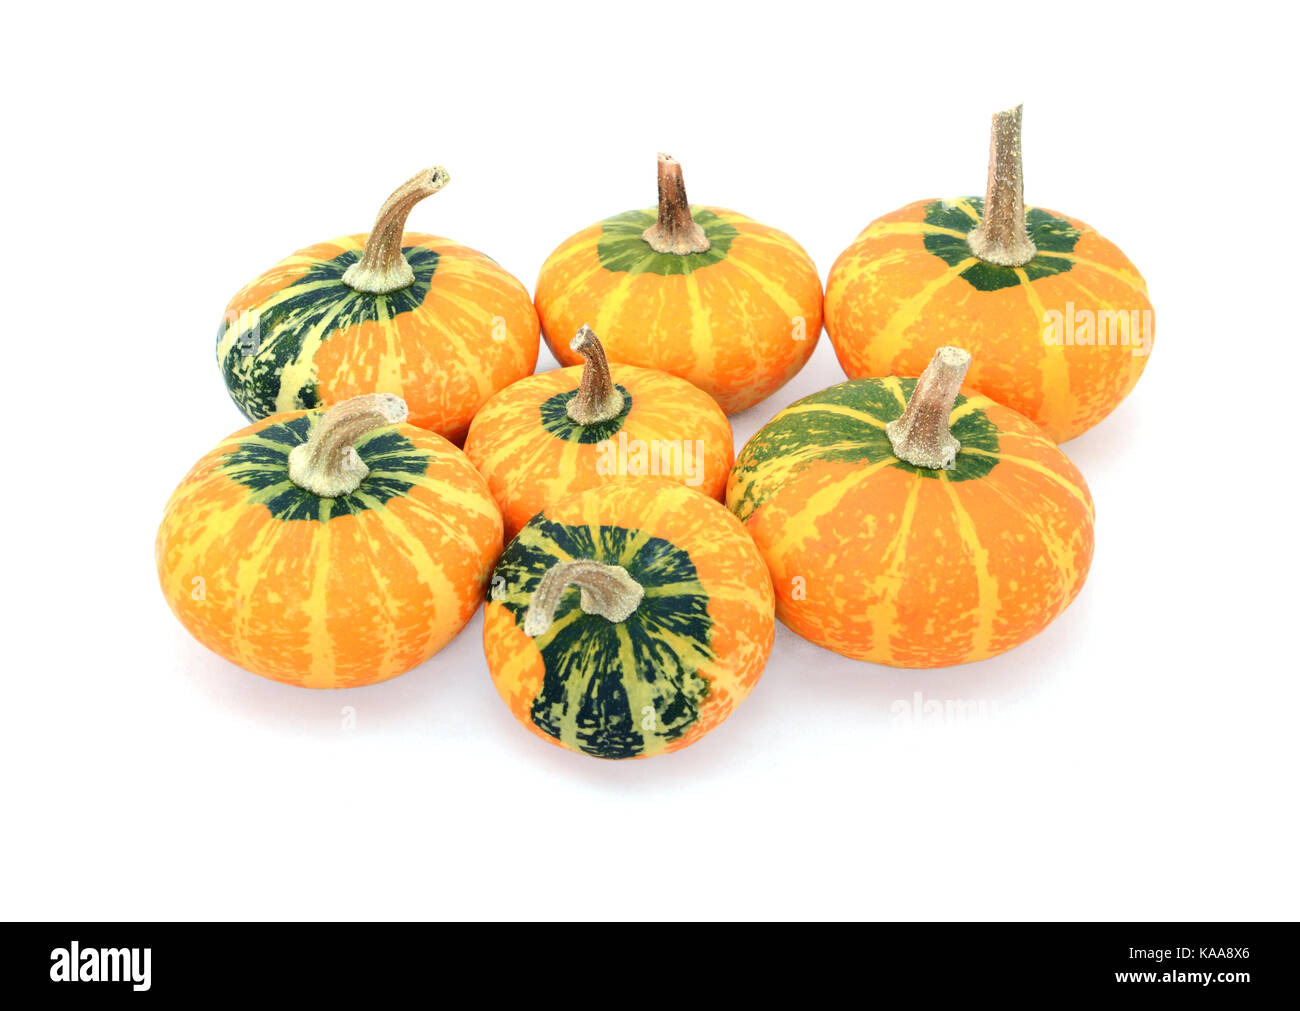 Group of seven small disc-shaped ornamental gourds with green and orange markings, isolated on a white background Stock Photo